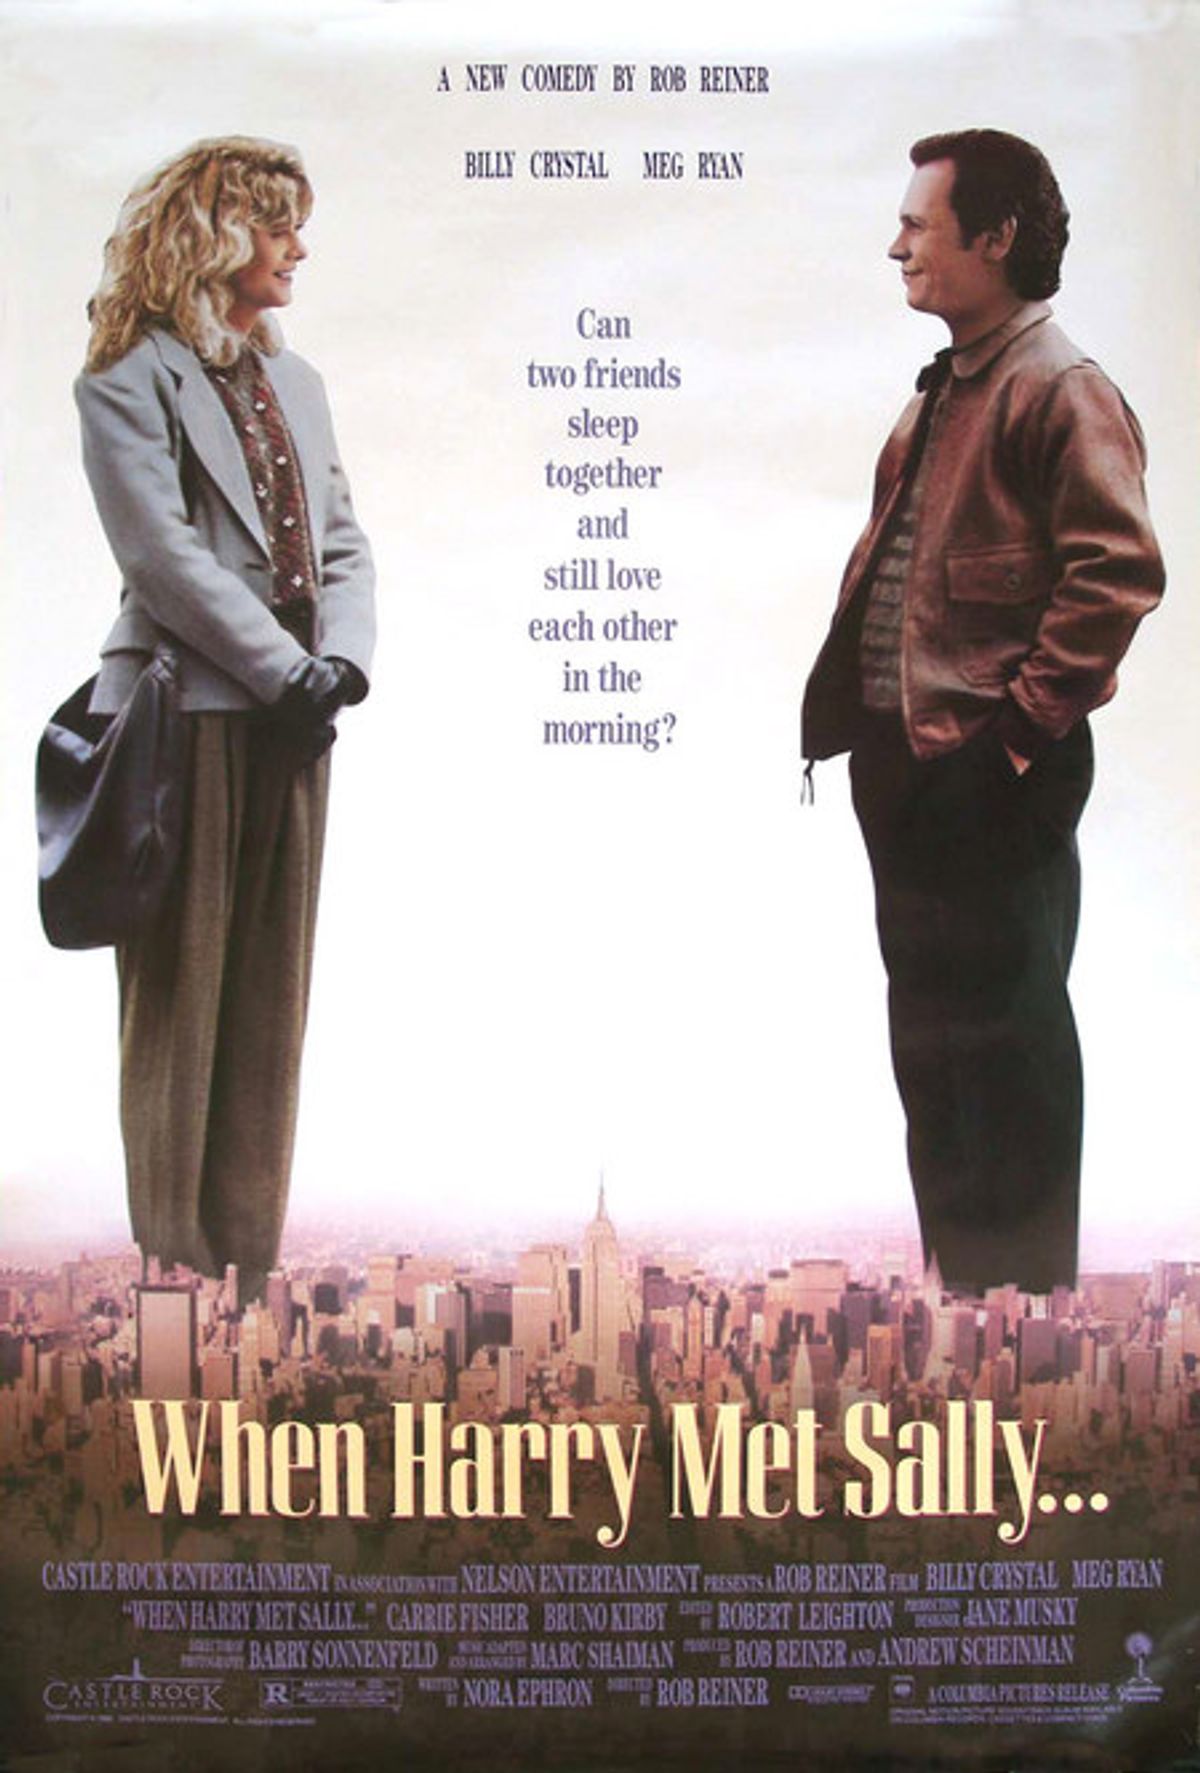 Poster for "When Harry Met Sally."